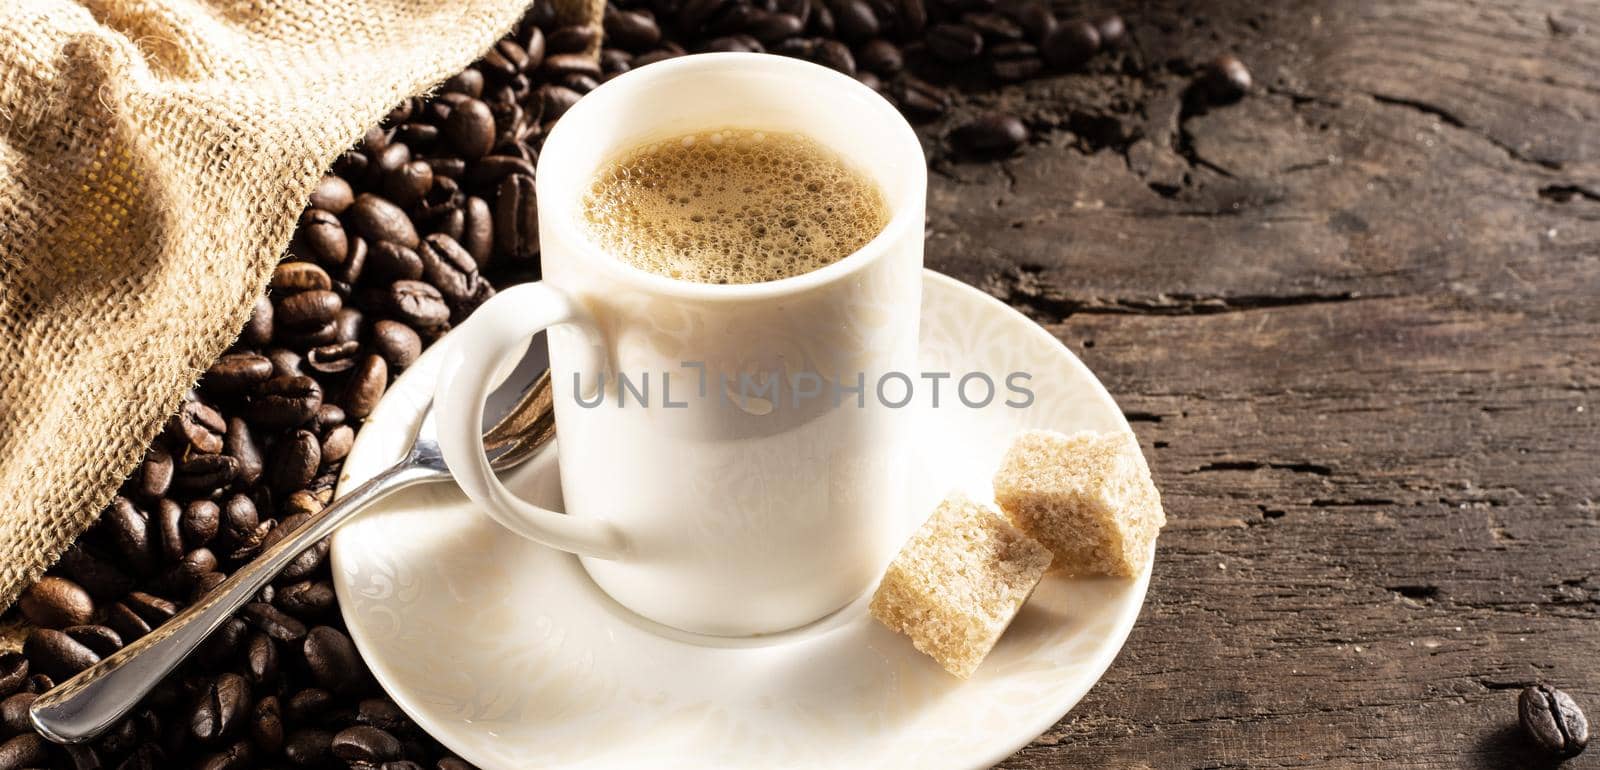 Rustic background with cup of coffee espresso in white porcelain cup with roasted coffee beans on old wood background with canvas bag